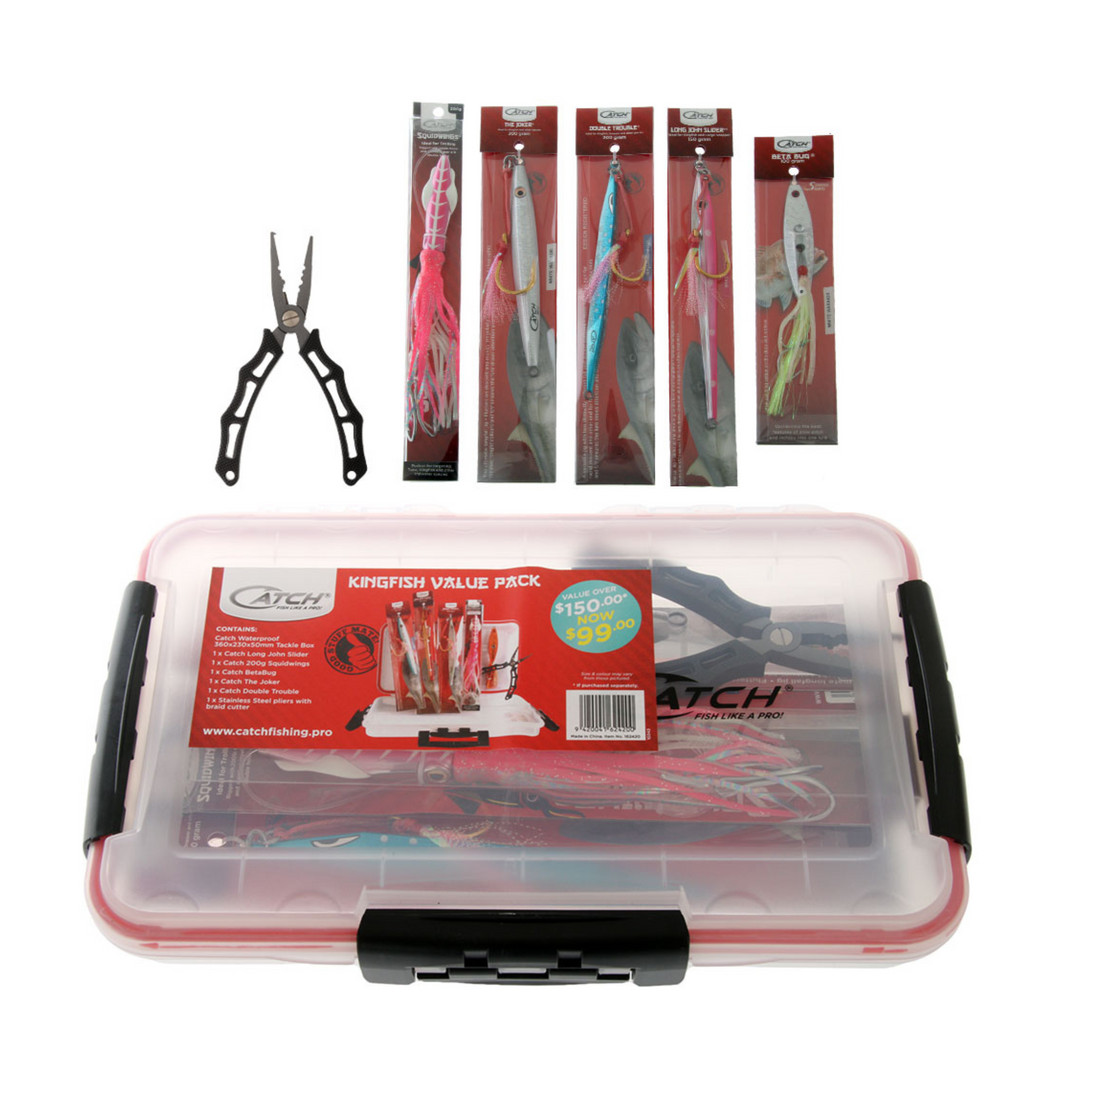 CATCH KINGFISH VALUE PACK TACKLE BOX